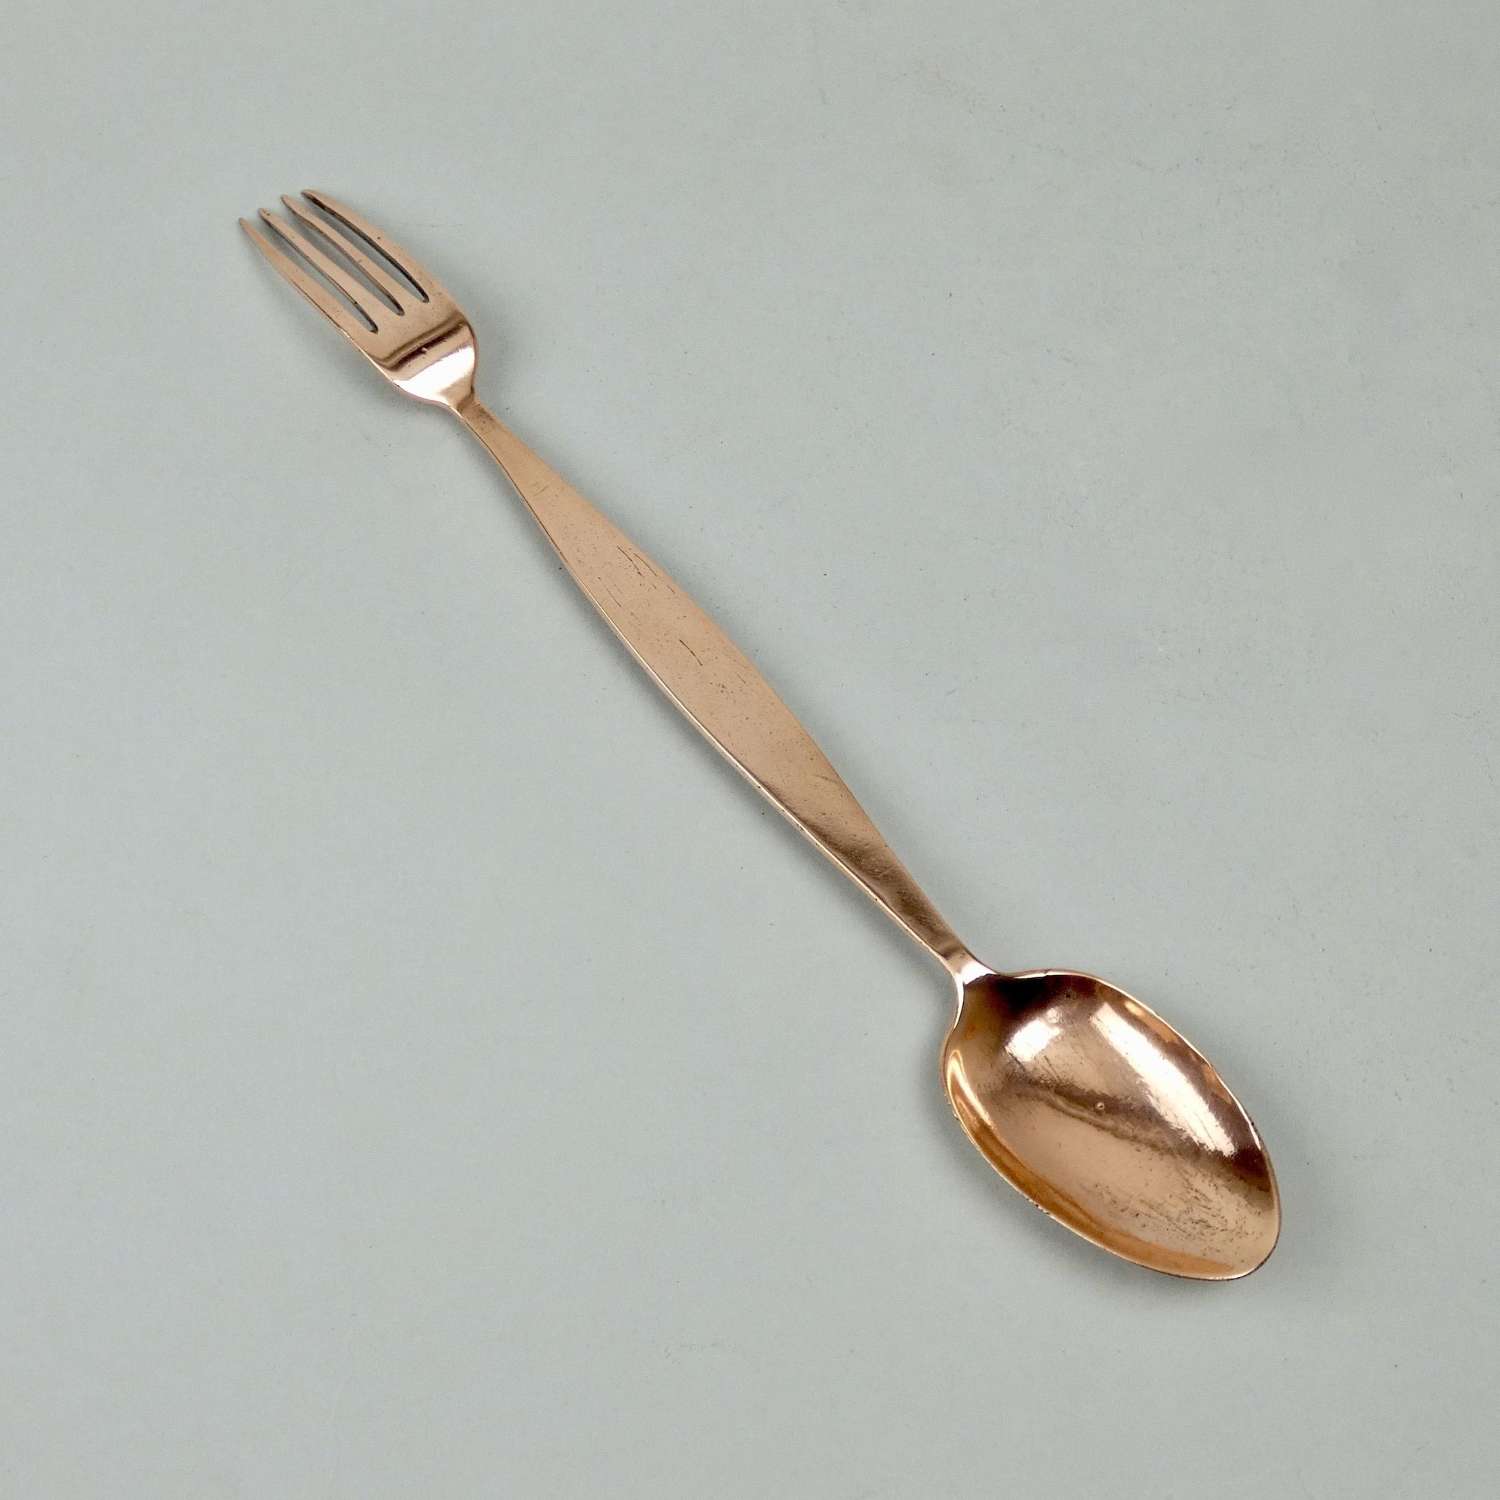 Double ended copper spoon & fork